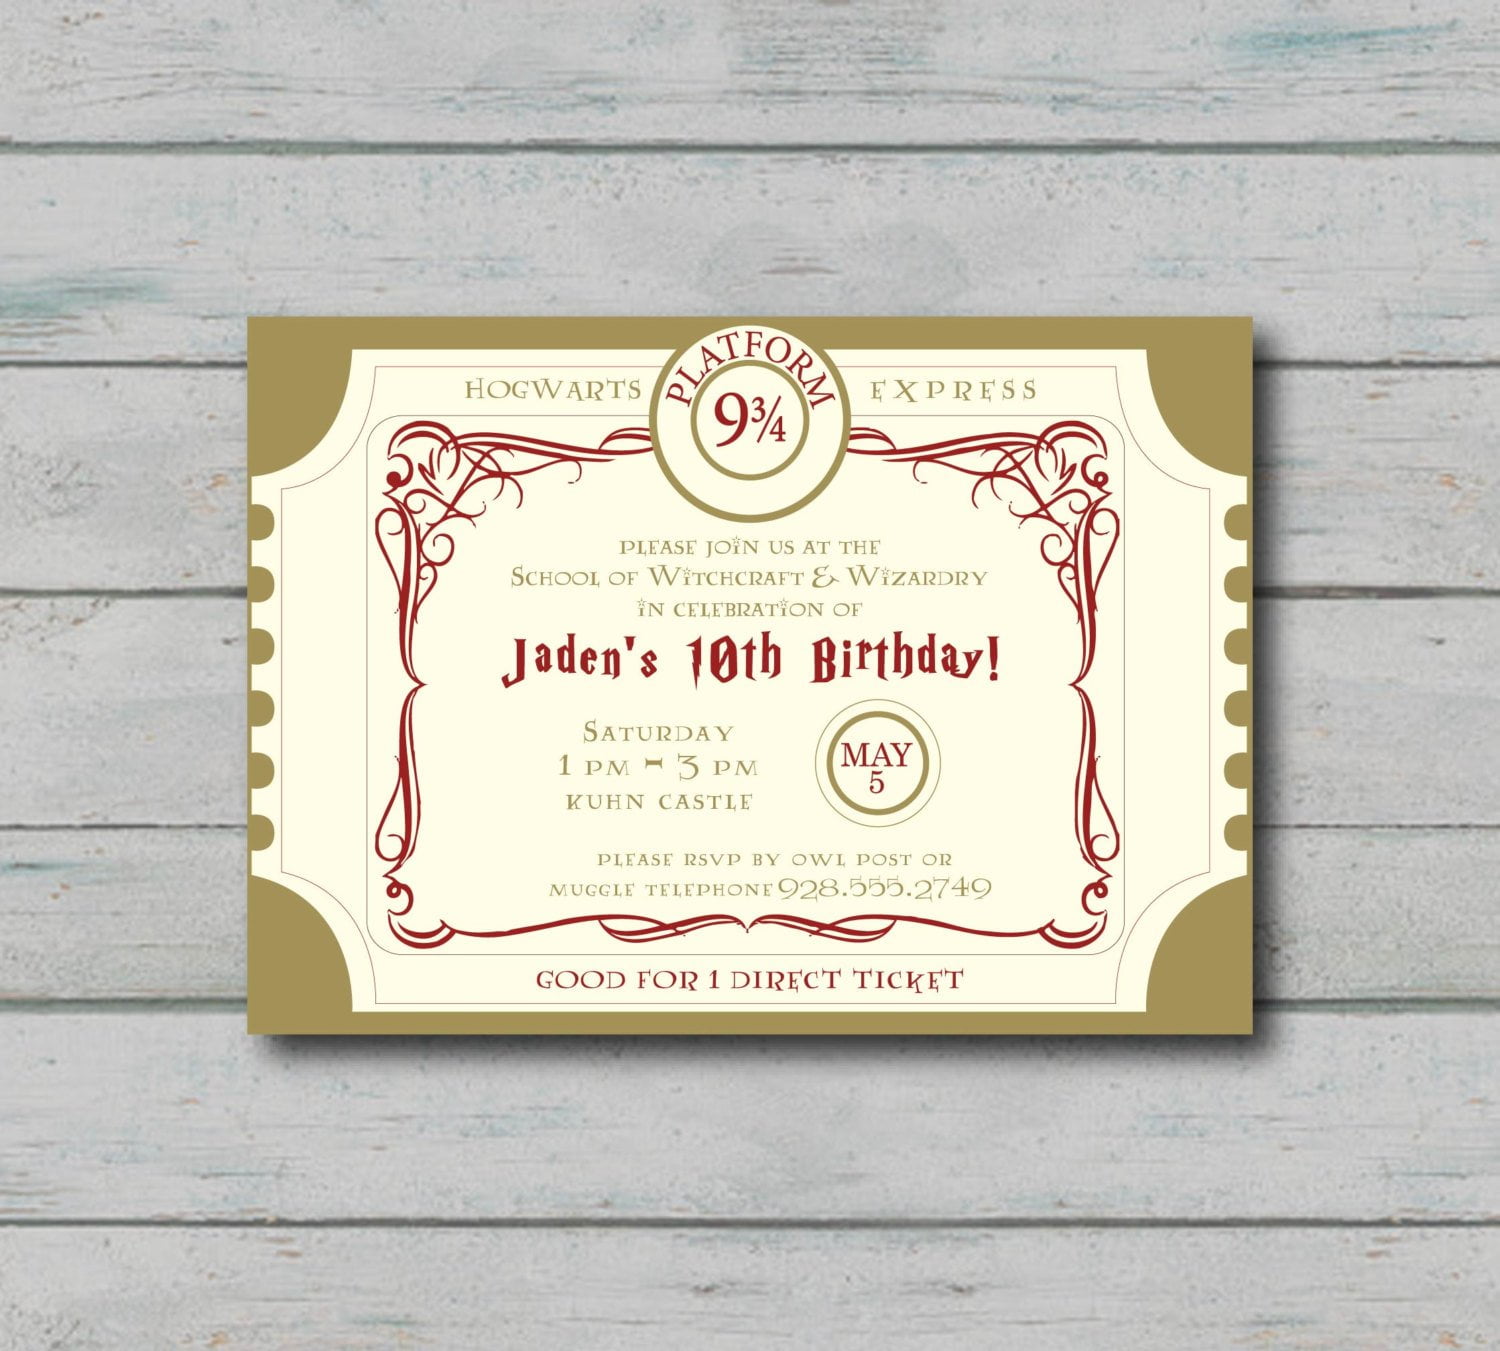 FREE Hogwarts Express invitation template  Download Hundreds FREE With Harry Potter Certificate Template